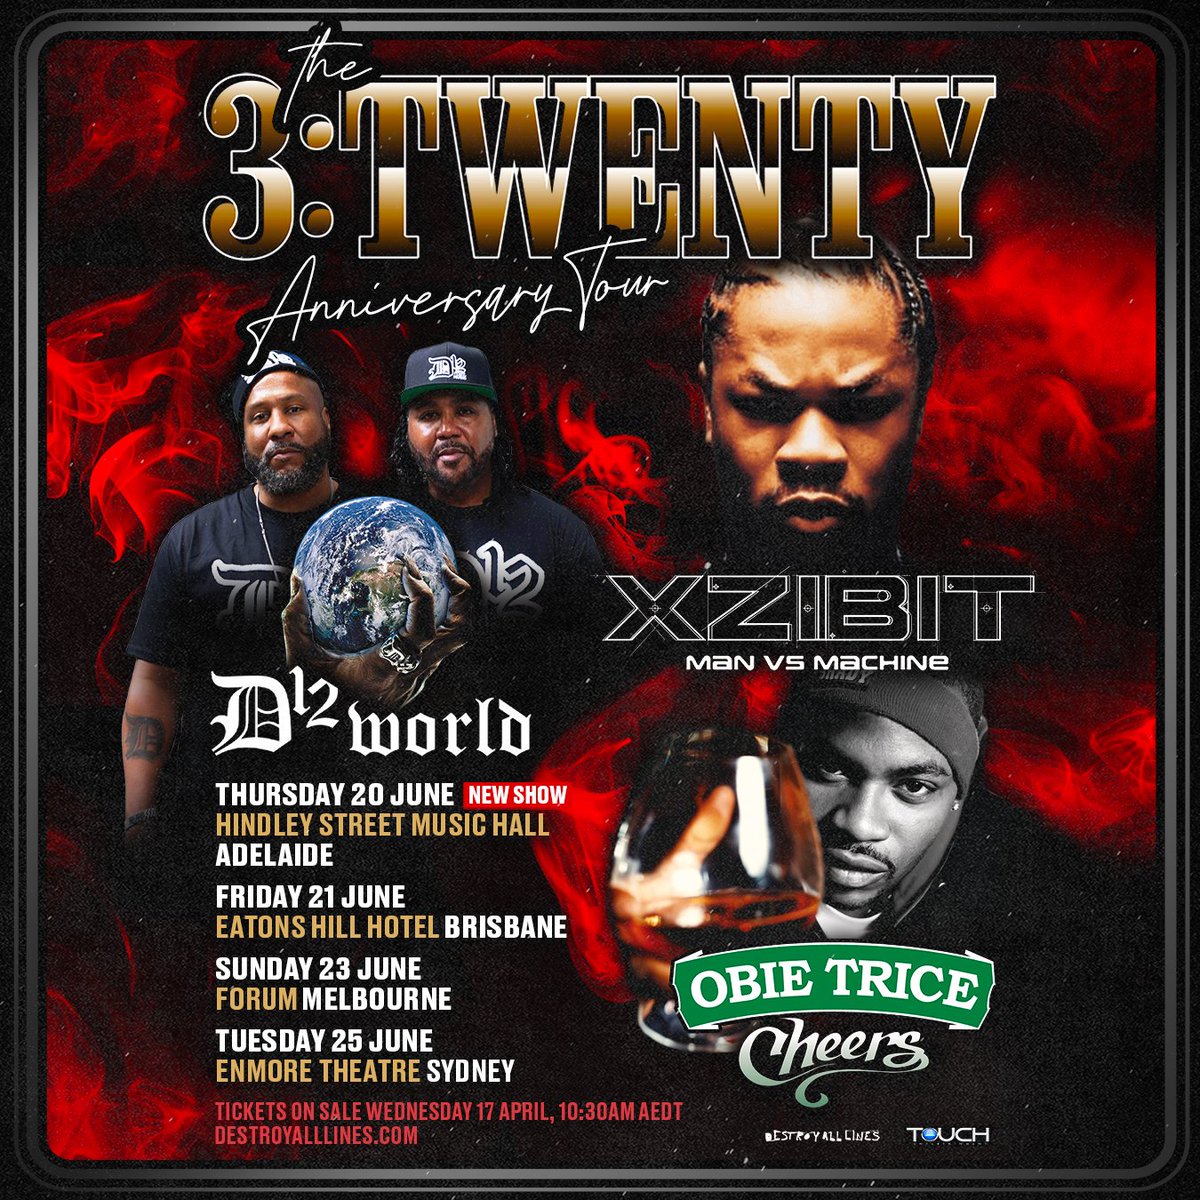 The Rap Tour of the Year just got bigger! Adelaide.... Xzibit, D12 + Obie Trice have heard your calls & added a show at the start of this historic tour. Lock in Thursday, June 20 at Hindley St Music Hall and note the dates for tickets and M&G upgrades. ➟ daltours.cc/3TwentyTour